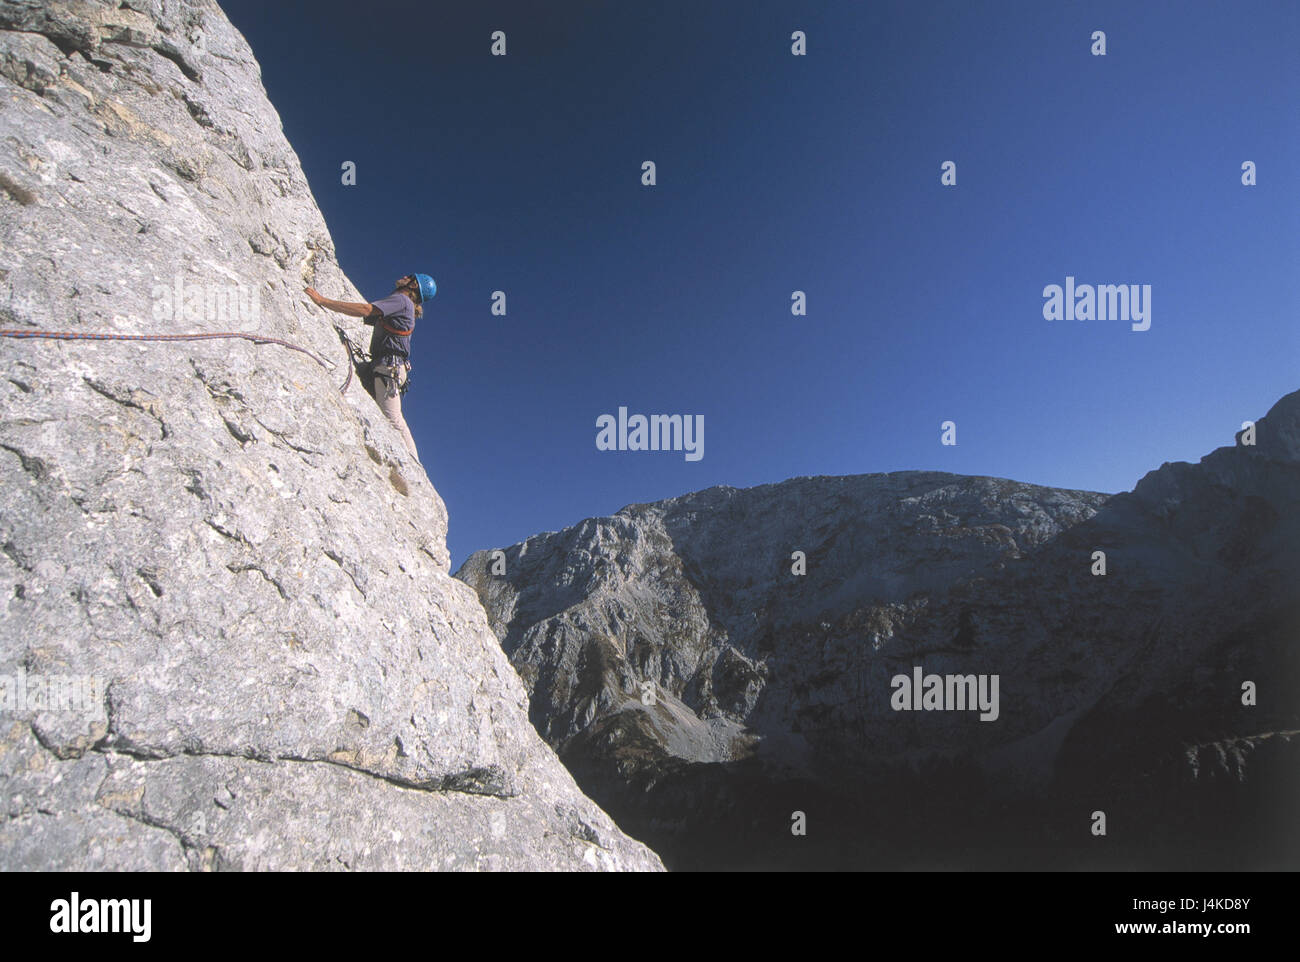 Germany, Bavaria, Ammergauer alps, hostage's stone, 1884 m, climbers alps, mountains, mountains, mountainous region, cliff face, mountaineer, climbing rope, helmet, alpine climbing, alpinism, climbing, mountain sport, Outdoorsport, sport, hobby, leisure time sport Stock Photo